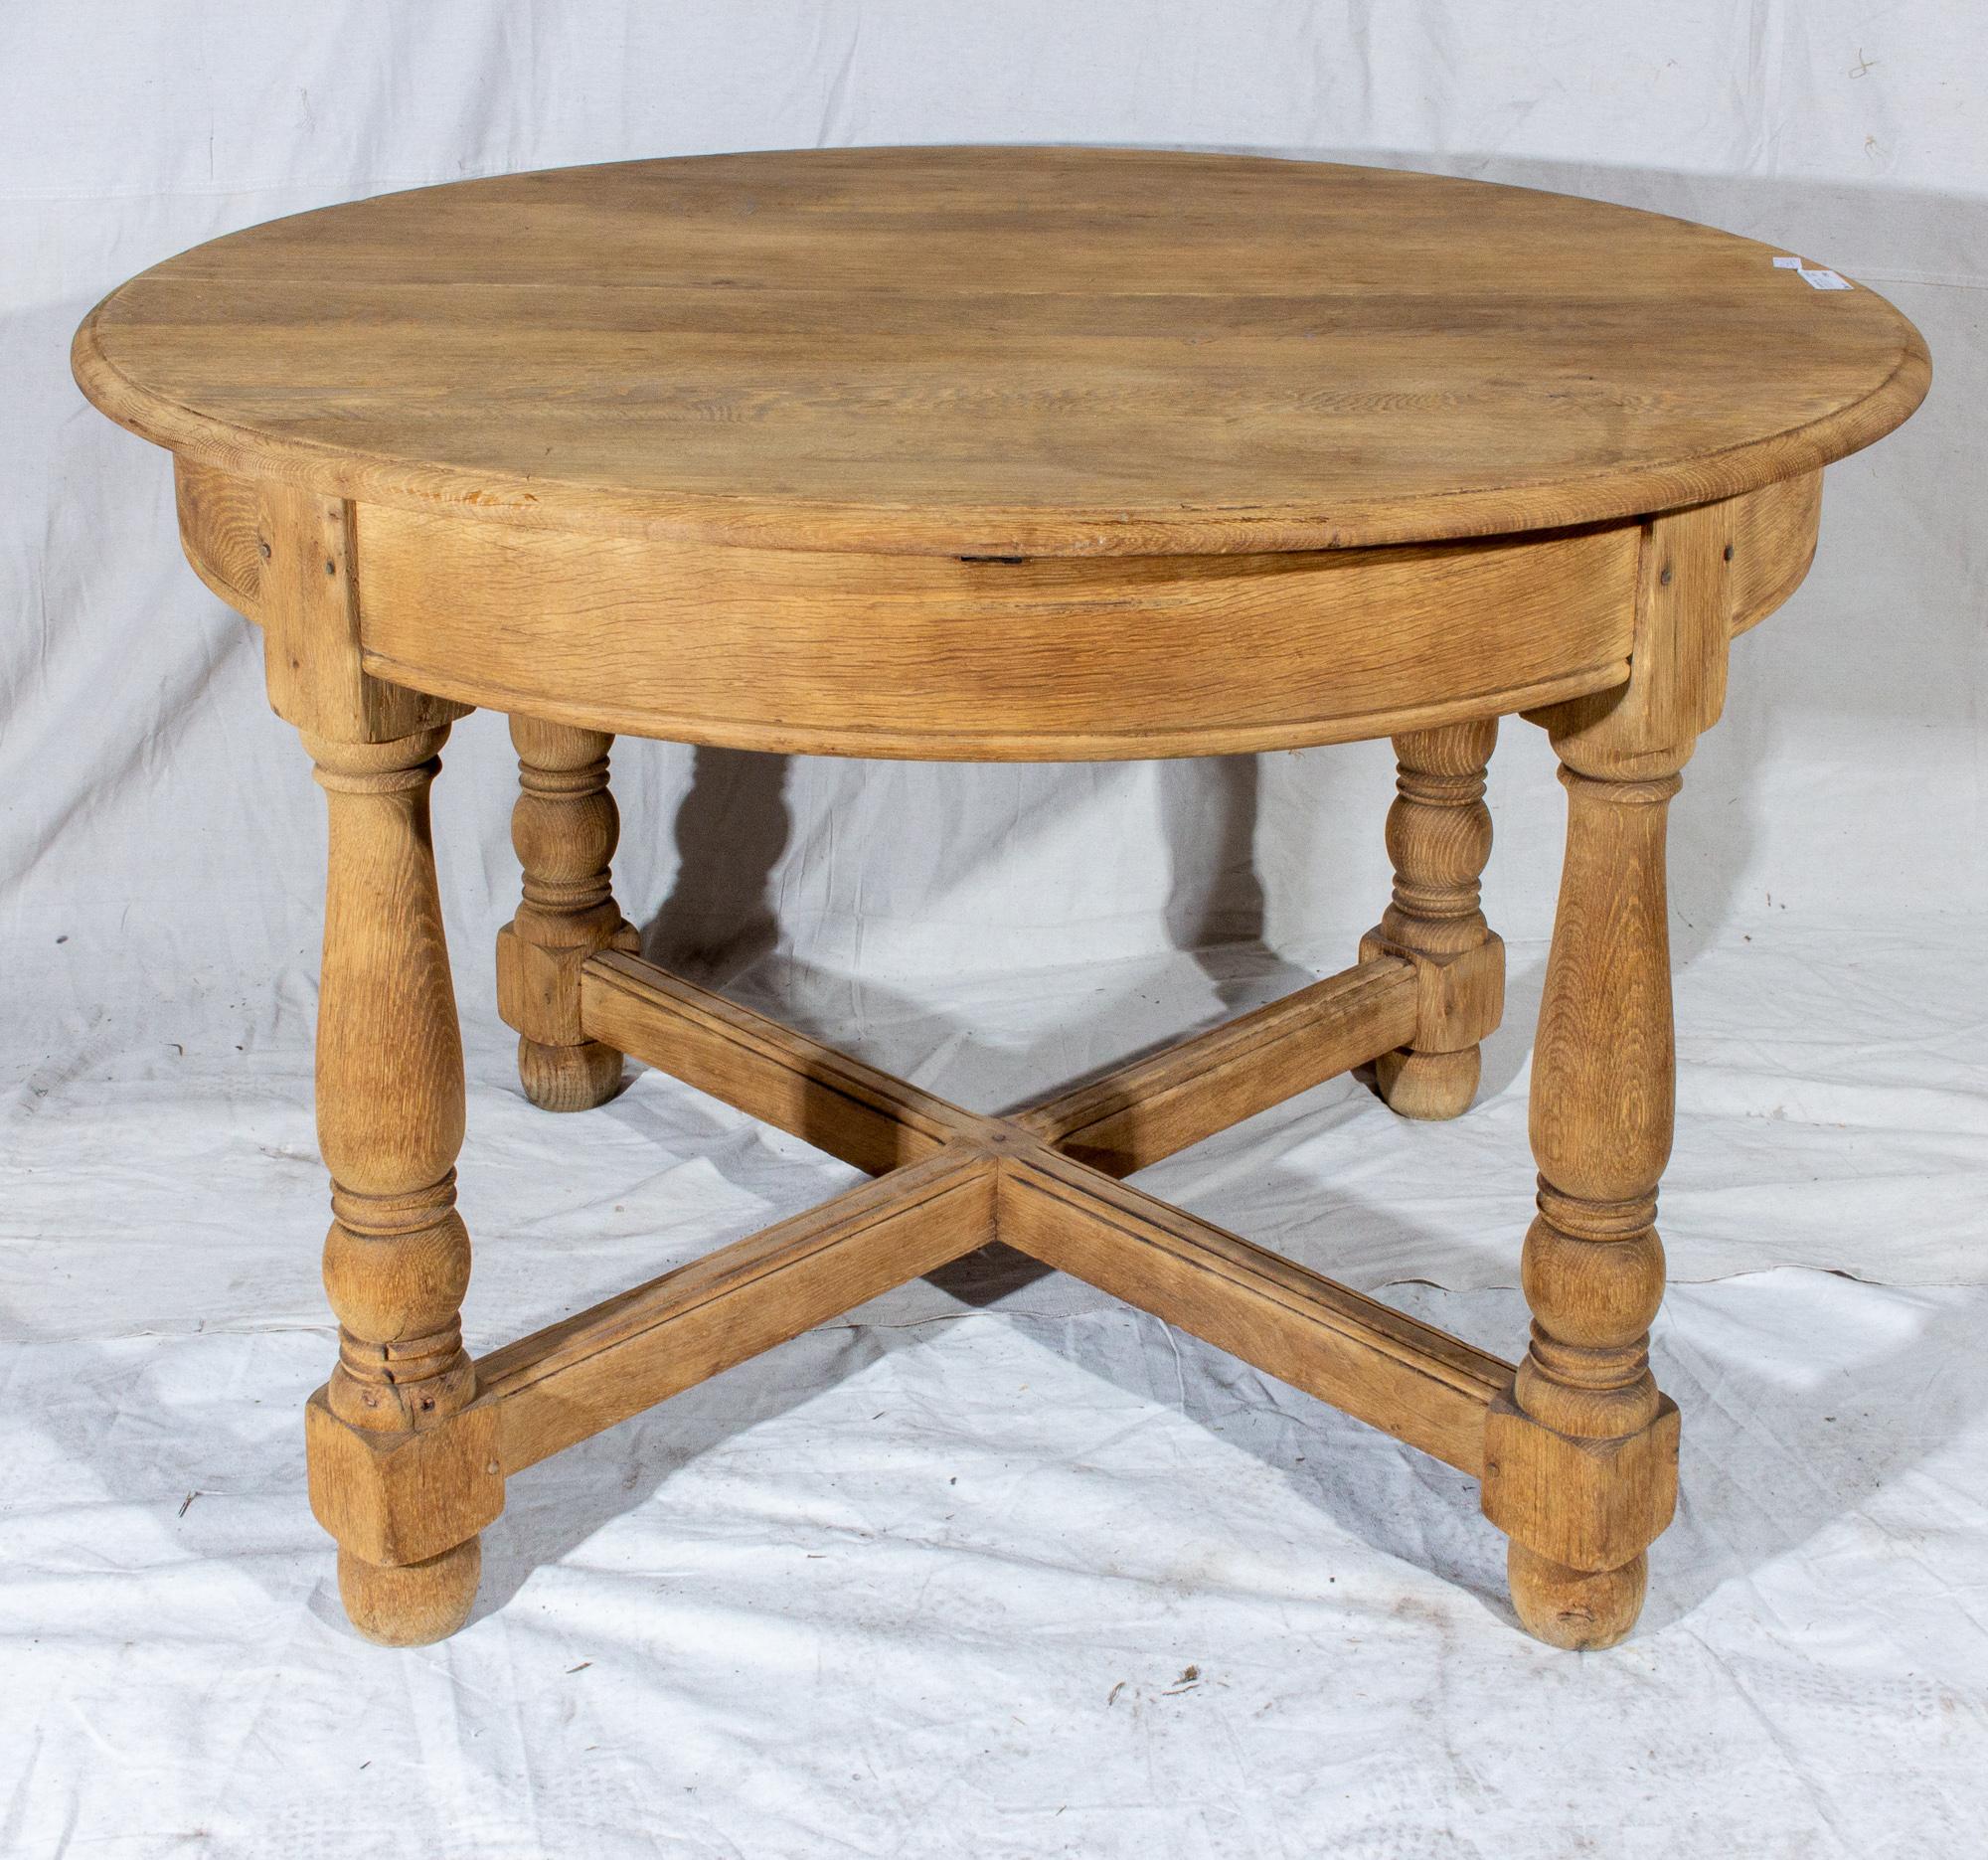 This vintage, French oak butterfly leaf table is perfect for those who need a little extra room for special gatherings. When closed, this table easily accommodates four people comfortably... and when guests arrive, simply open the middle section and